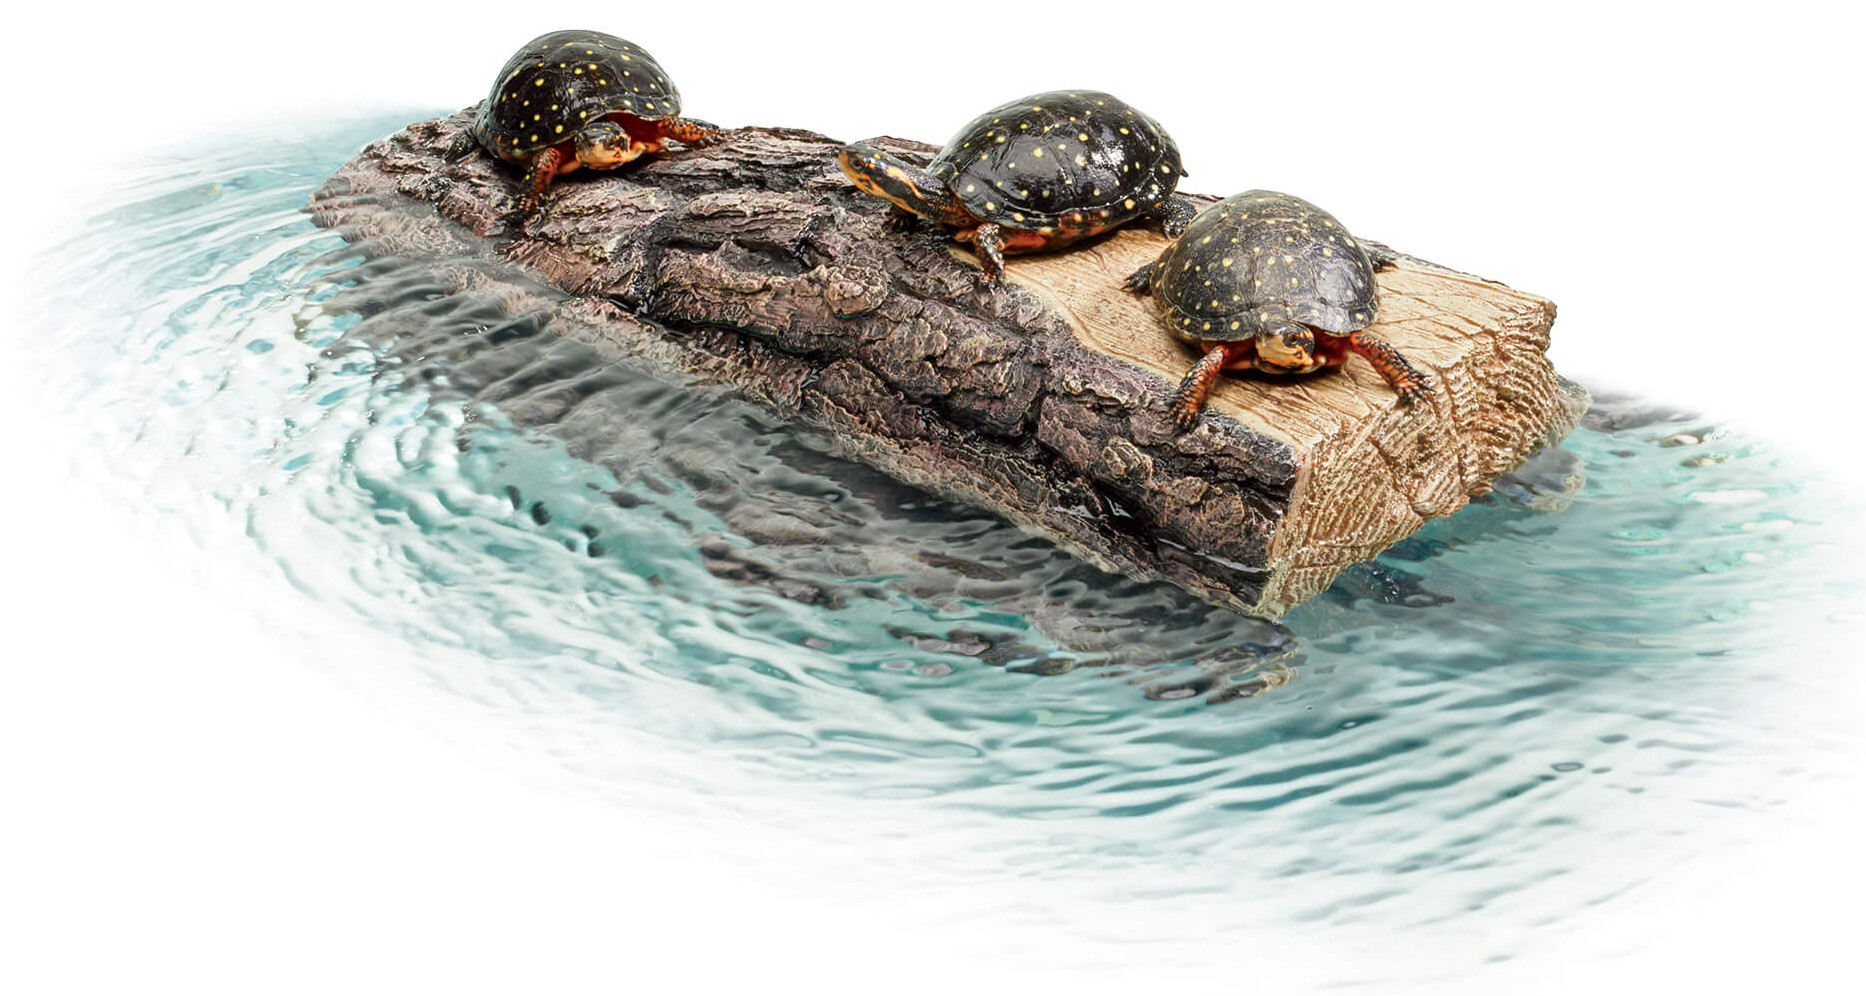 log on water with turtles floating on it